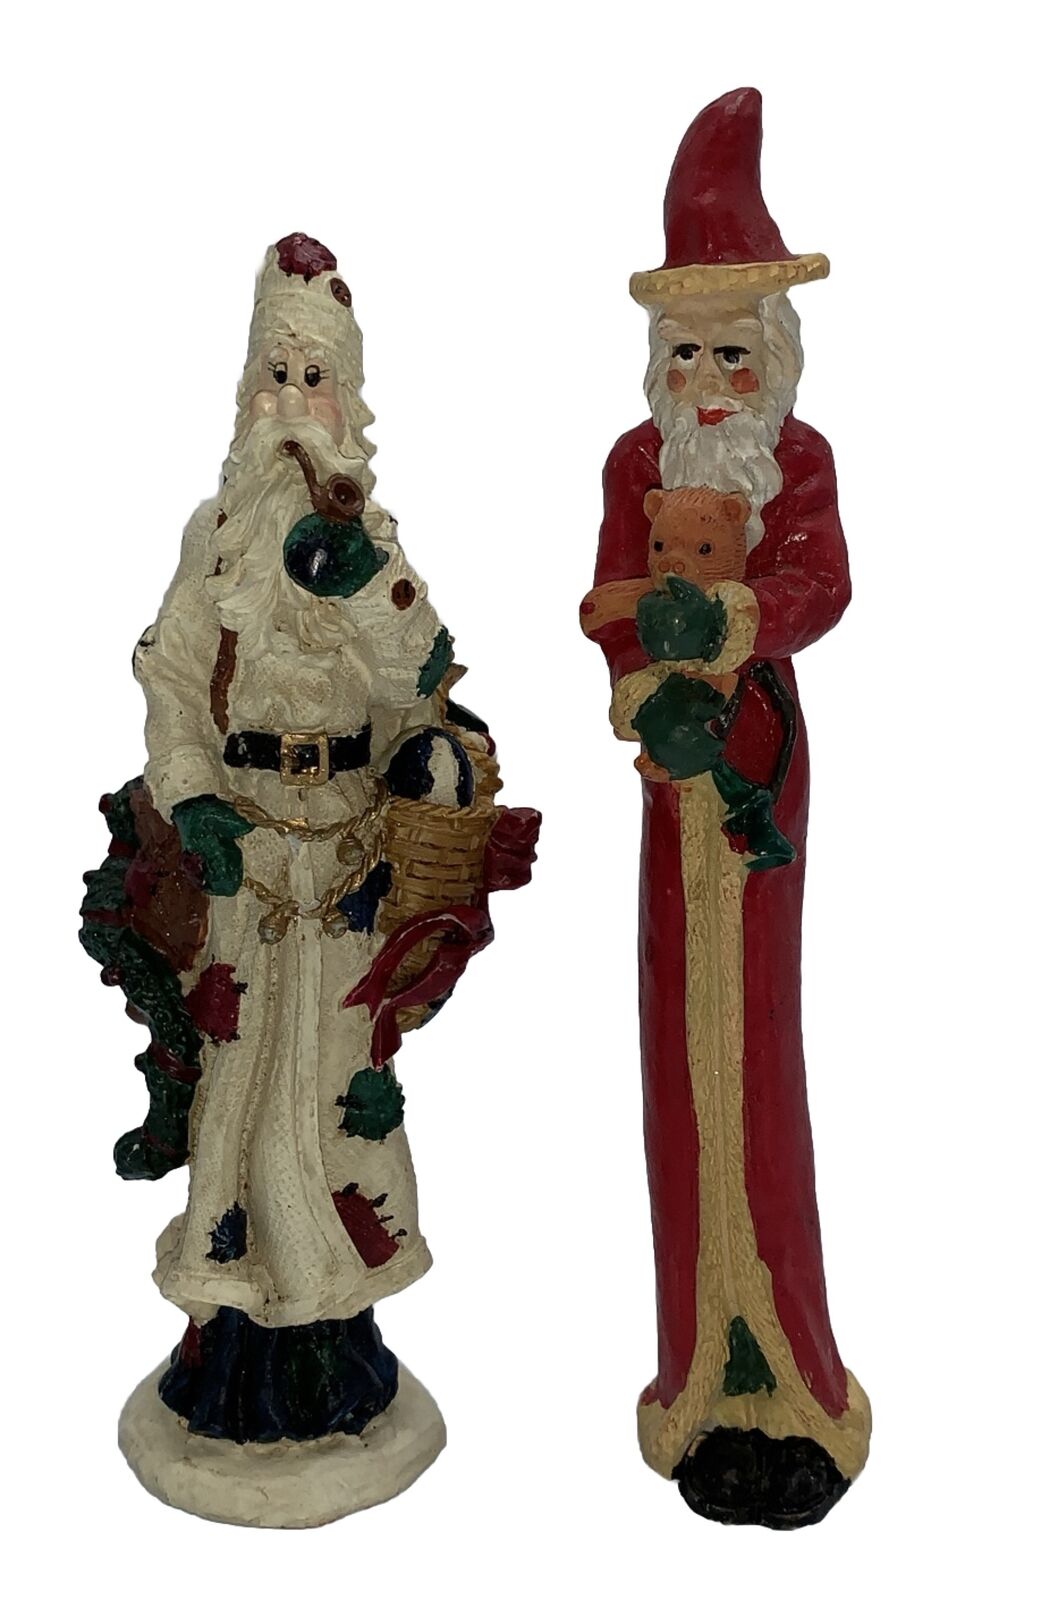 Skinny Old World Santas Set Of 2 5.75 & 6.5” Tall Hand Painted Free Standing